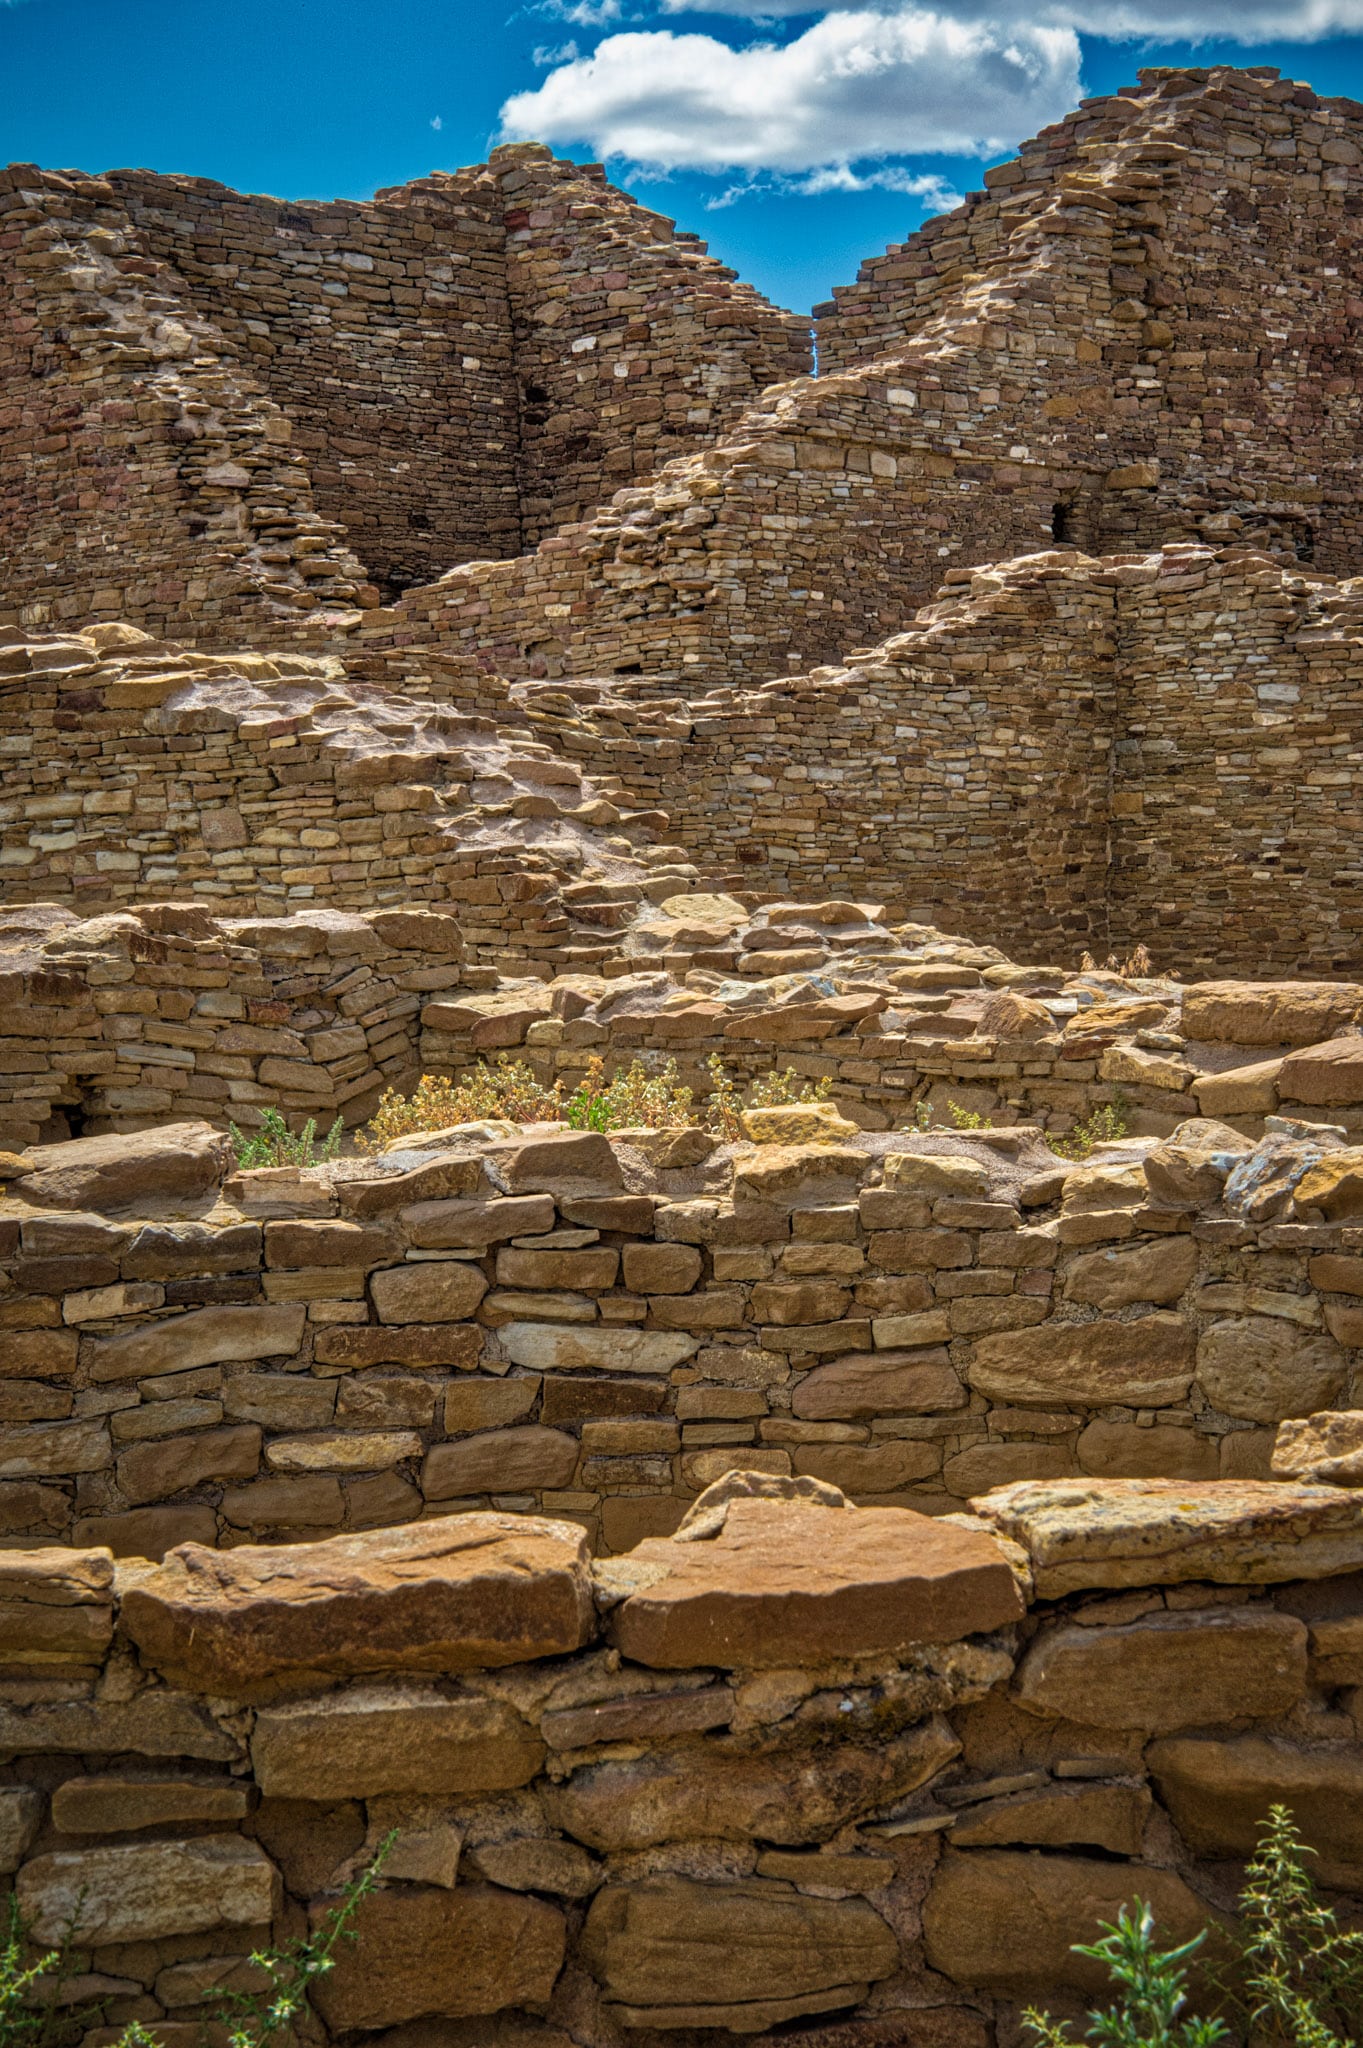 This is a view up the mound at the ruins of Pueblo del Arroyo, which was one of the great houses in Chaco Canyon, New Mexico.